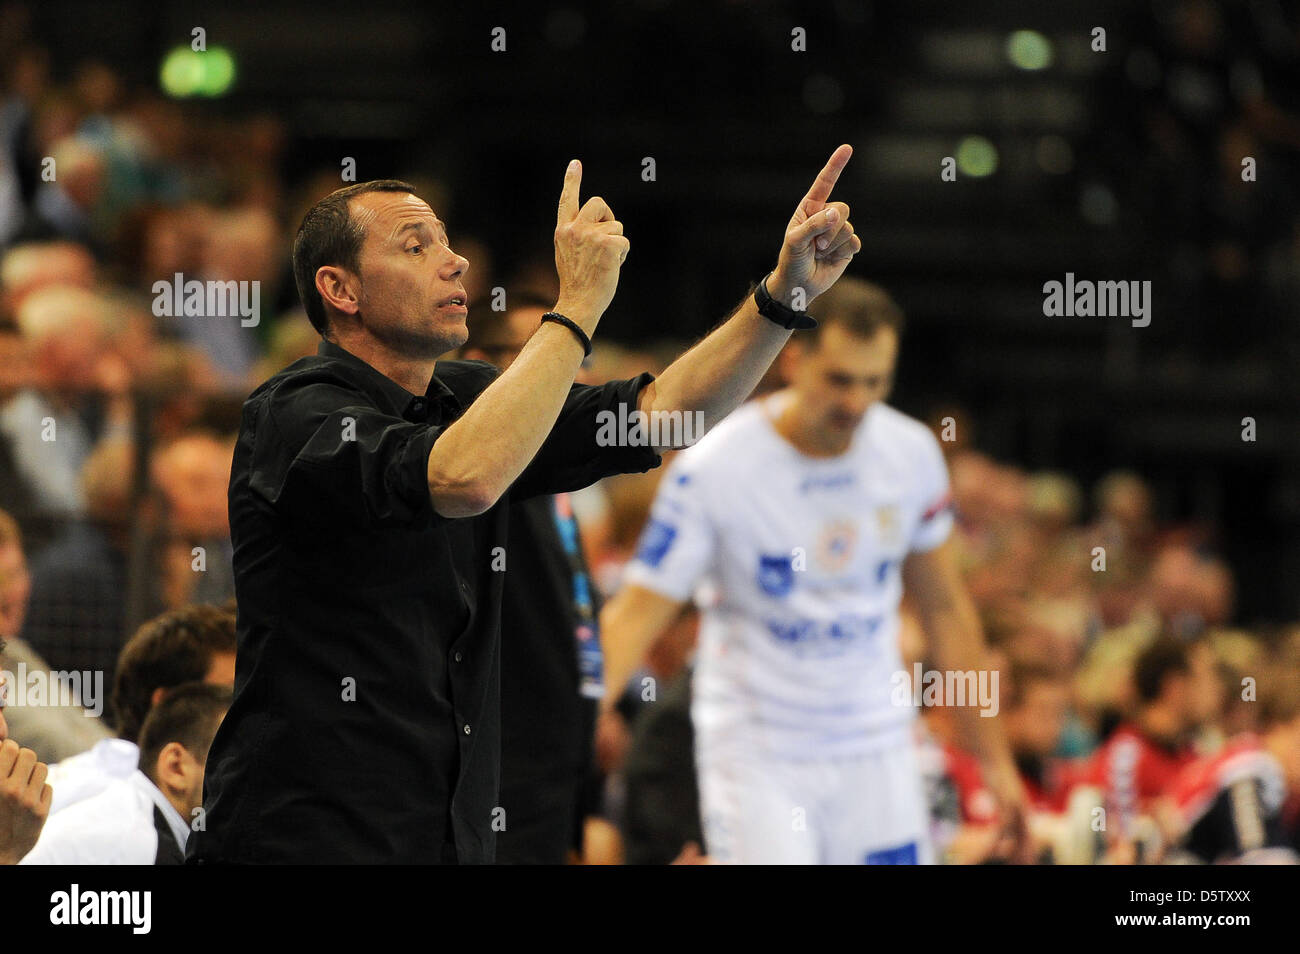 Flensburg's head coach Patrice Canayer gestures at the sideline during the Handball Champions League match between SG Flensburg-Handewitt and Montpellier AHB at Campushalle in Flensburg, Germany, 27 September 2012. Photo: Benjamin Nolte Stock Photo